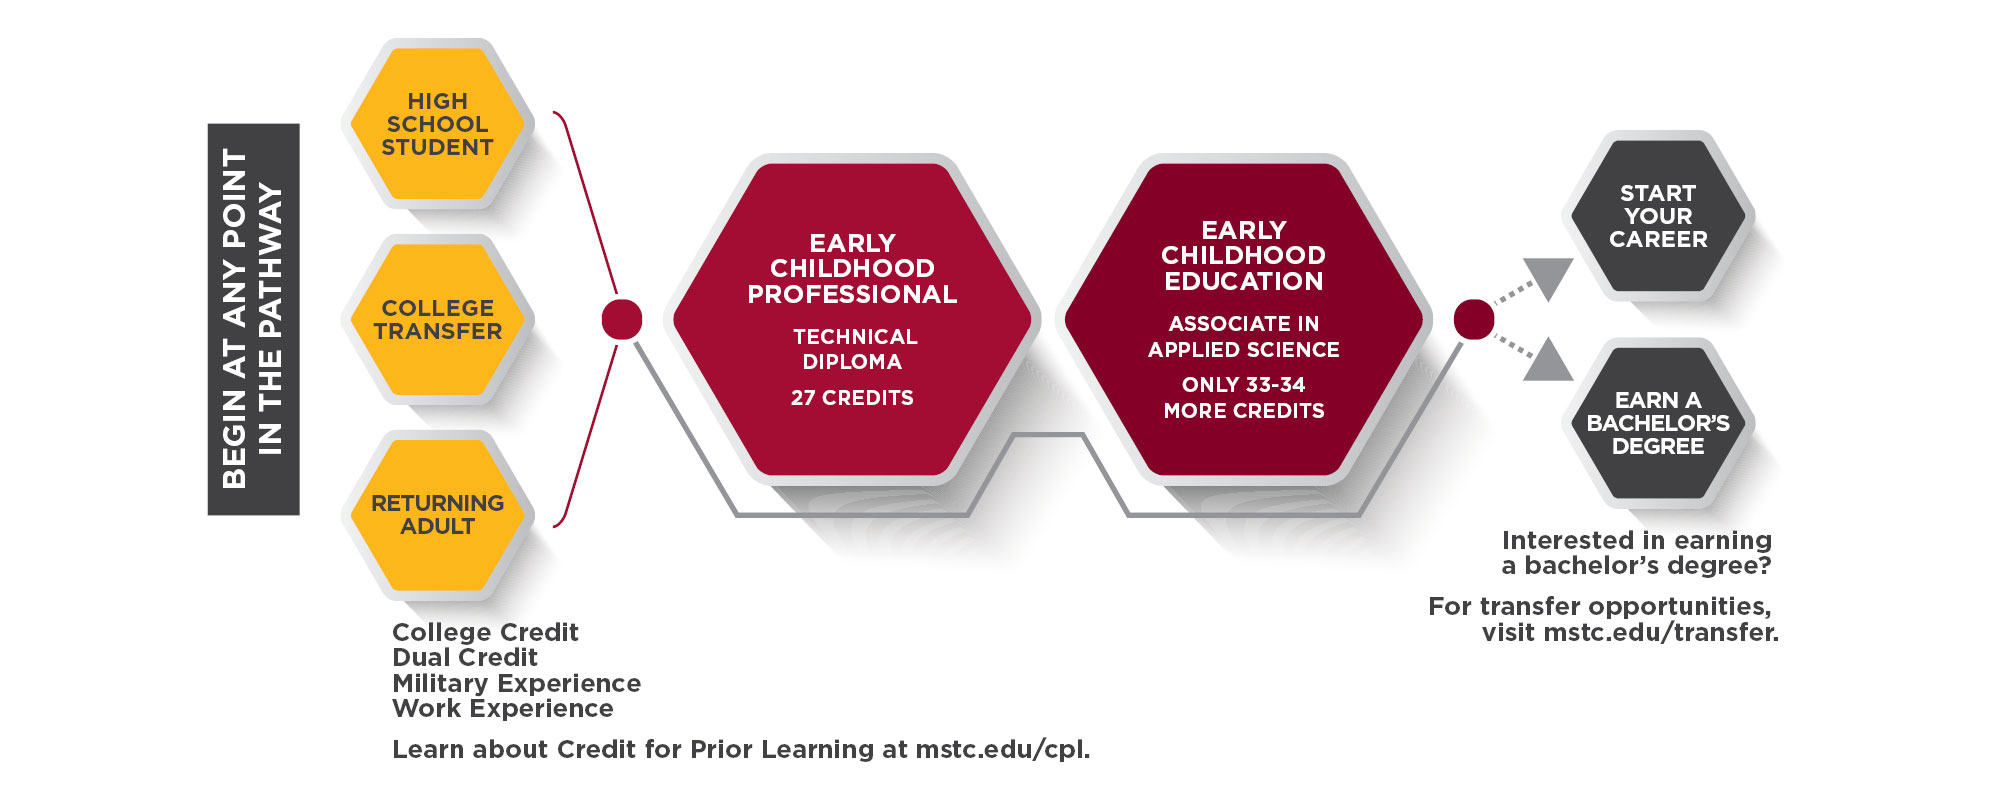 Early Childhood Education Pathway Graphic